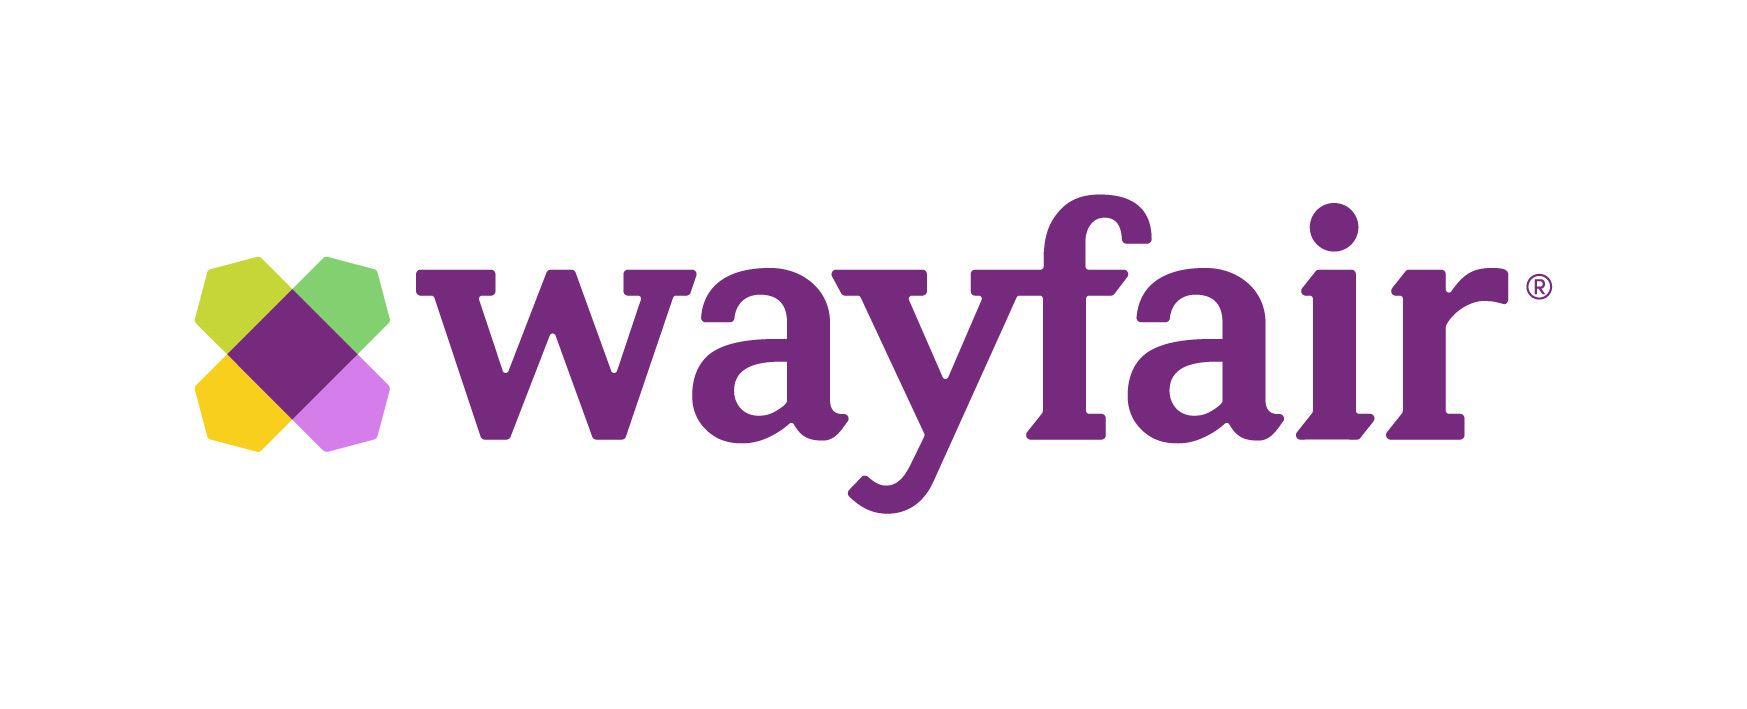 Popular Purple Logo - Wayfair Reports 52% Increase in Direct Retail Sales for Holiday ...